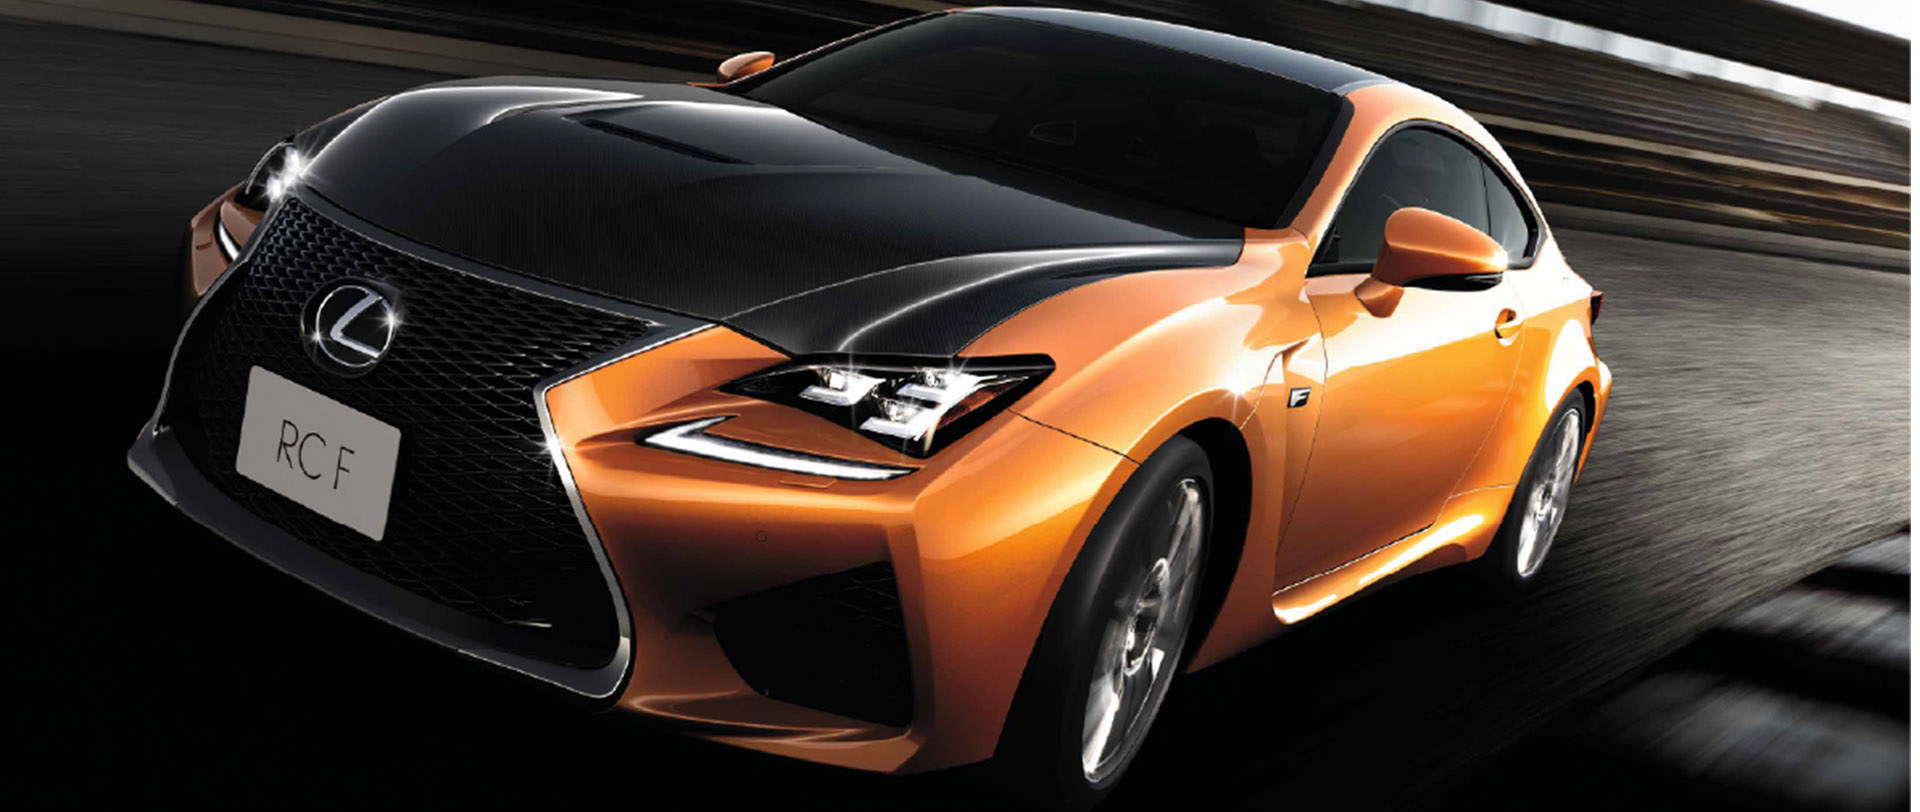 THE FIRST LEXUS RC F